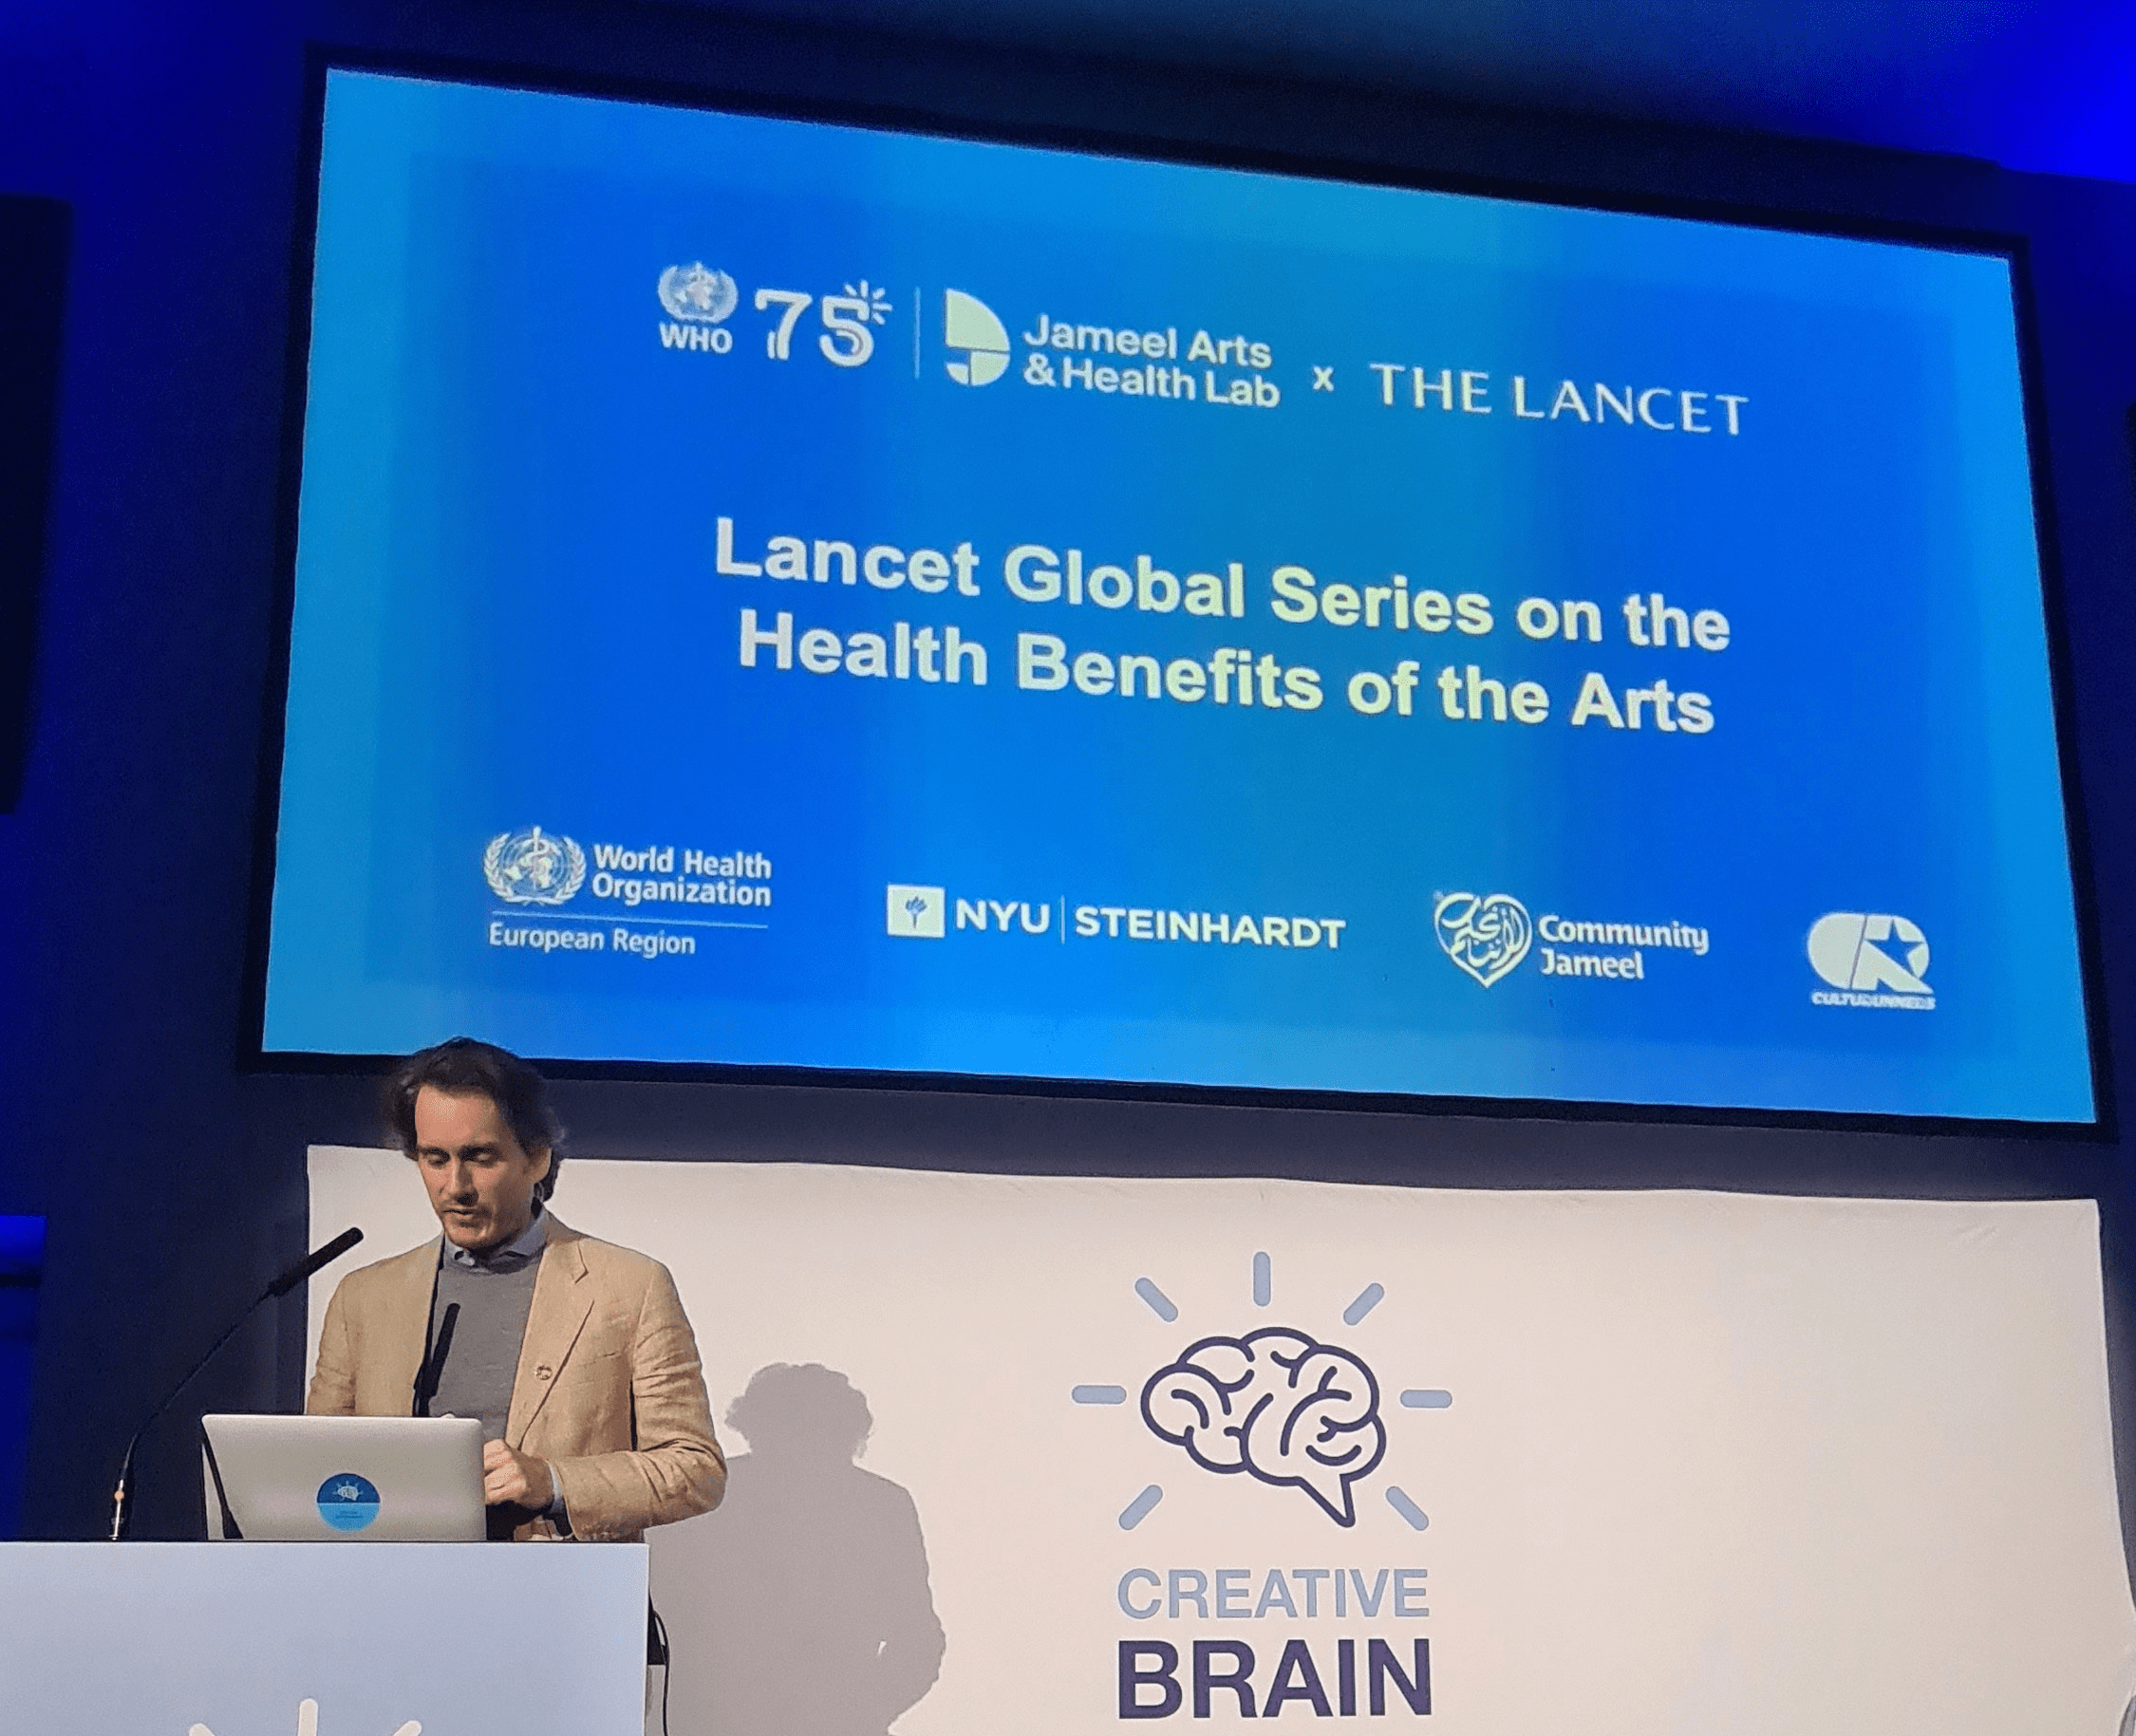 WHO Lancet Global Series on the Health Benefit of the Arts at the Creative Brain Week, Trinity College, Dublin